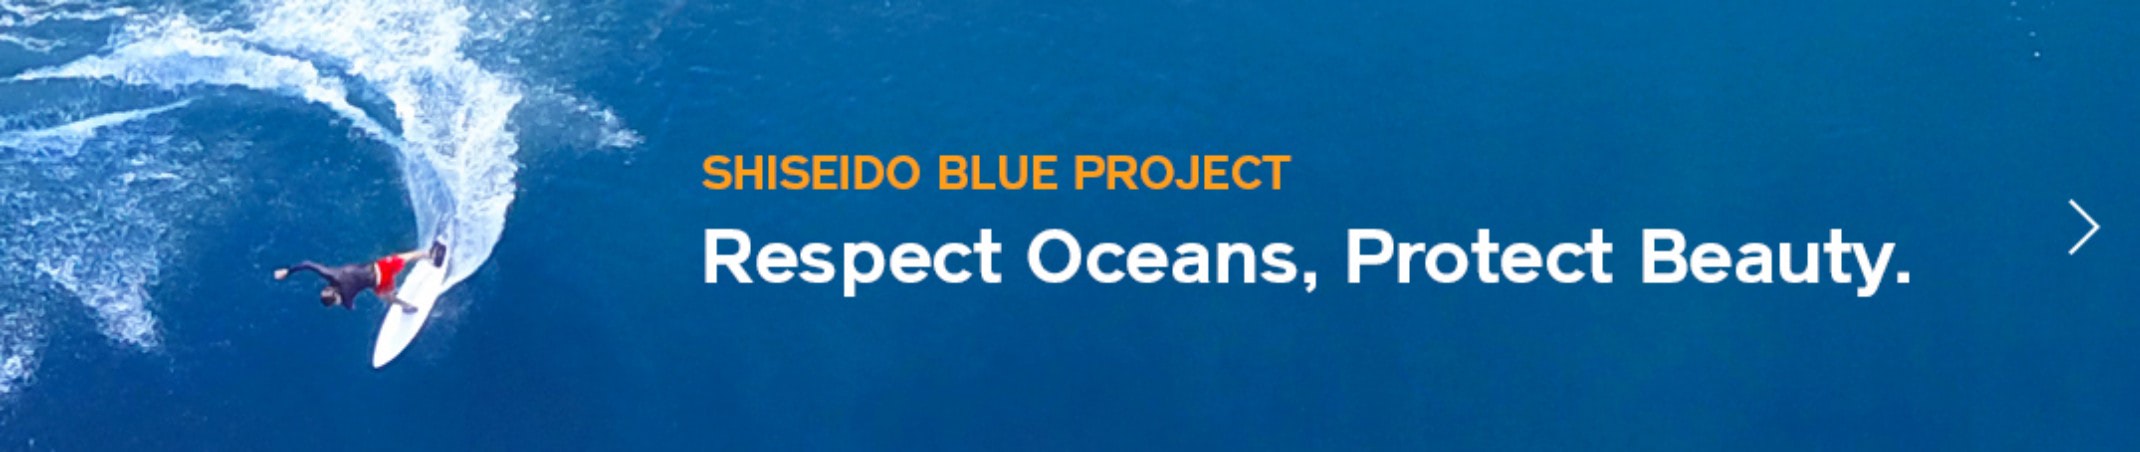 [SHISEIDO BLUE PROJECT] Respect Oceans, Protect Beauty.